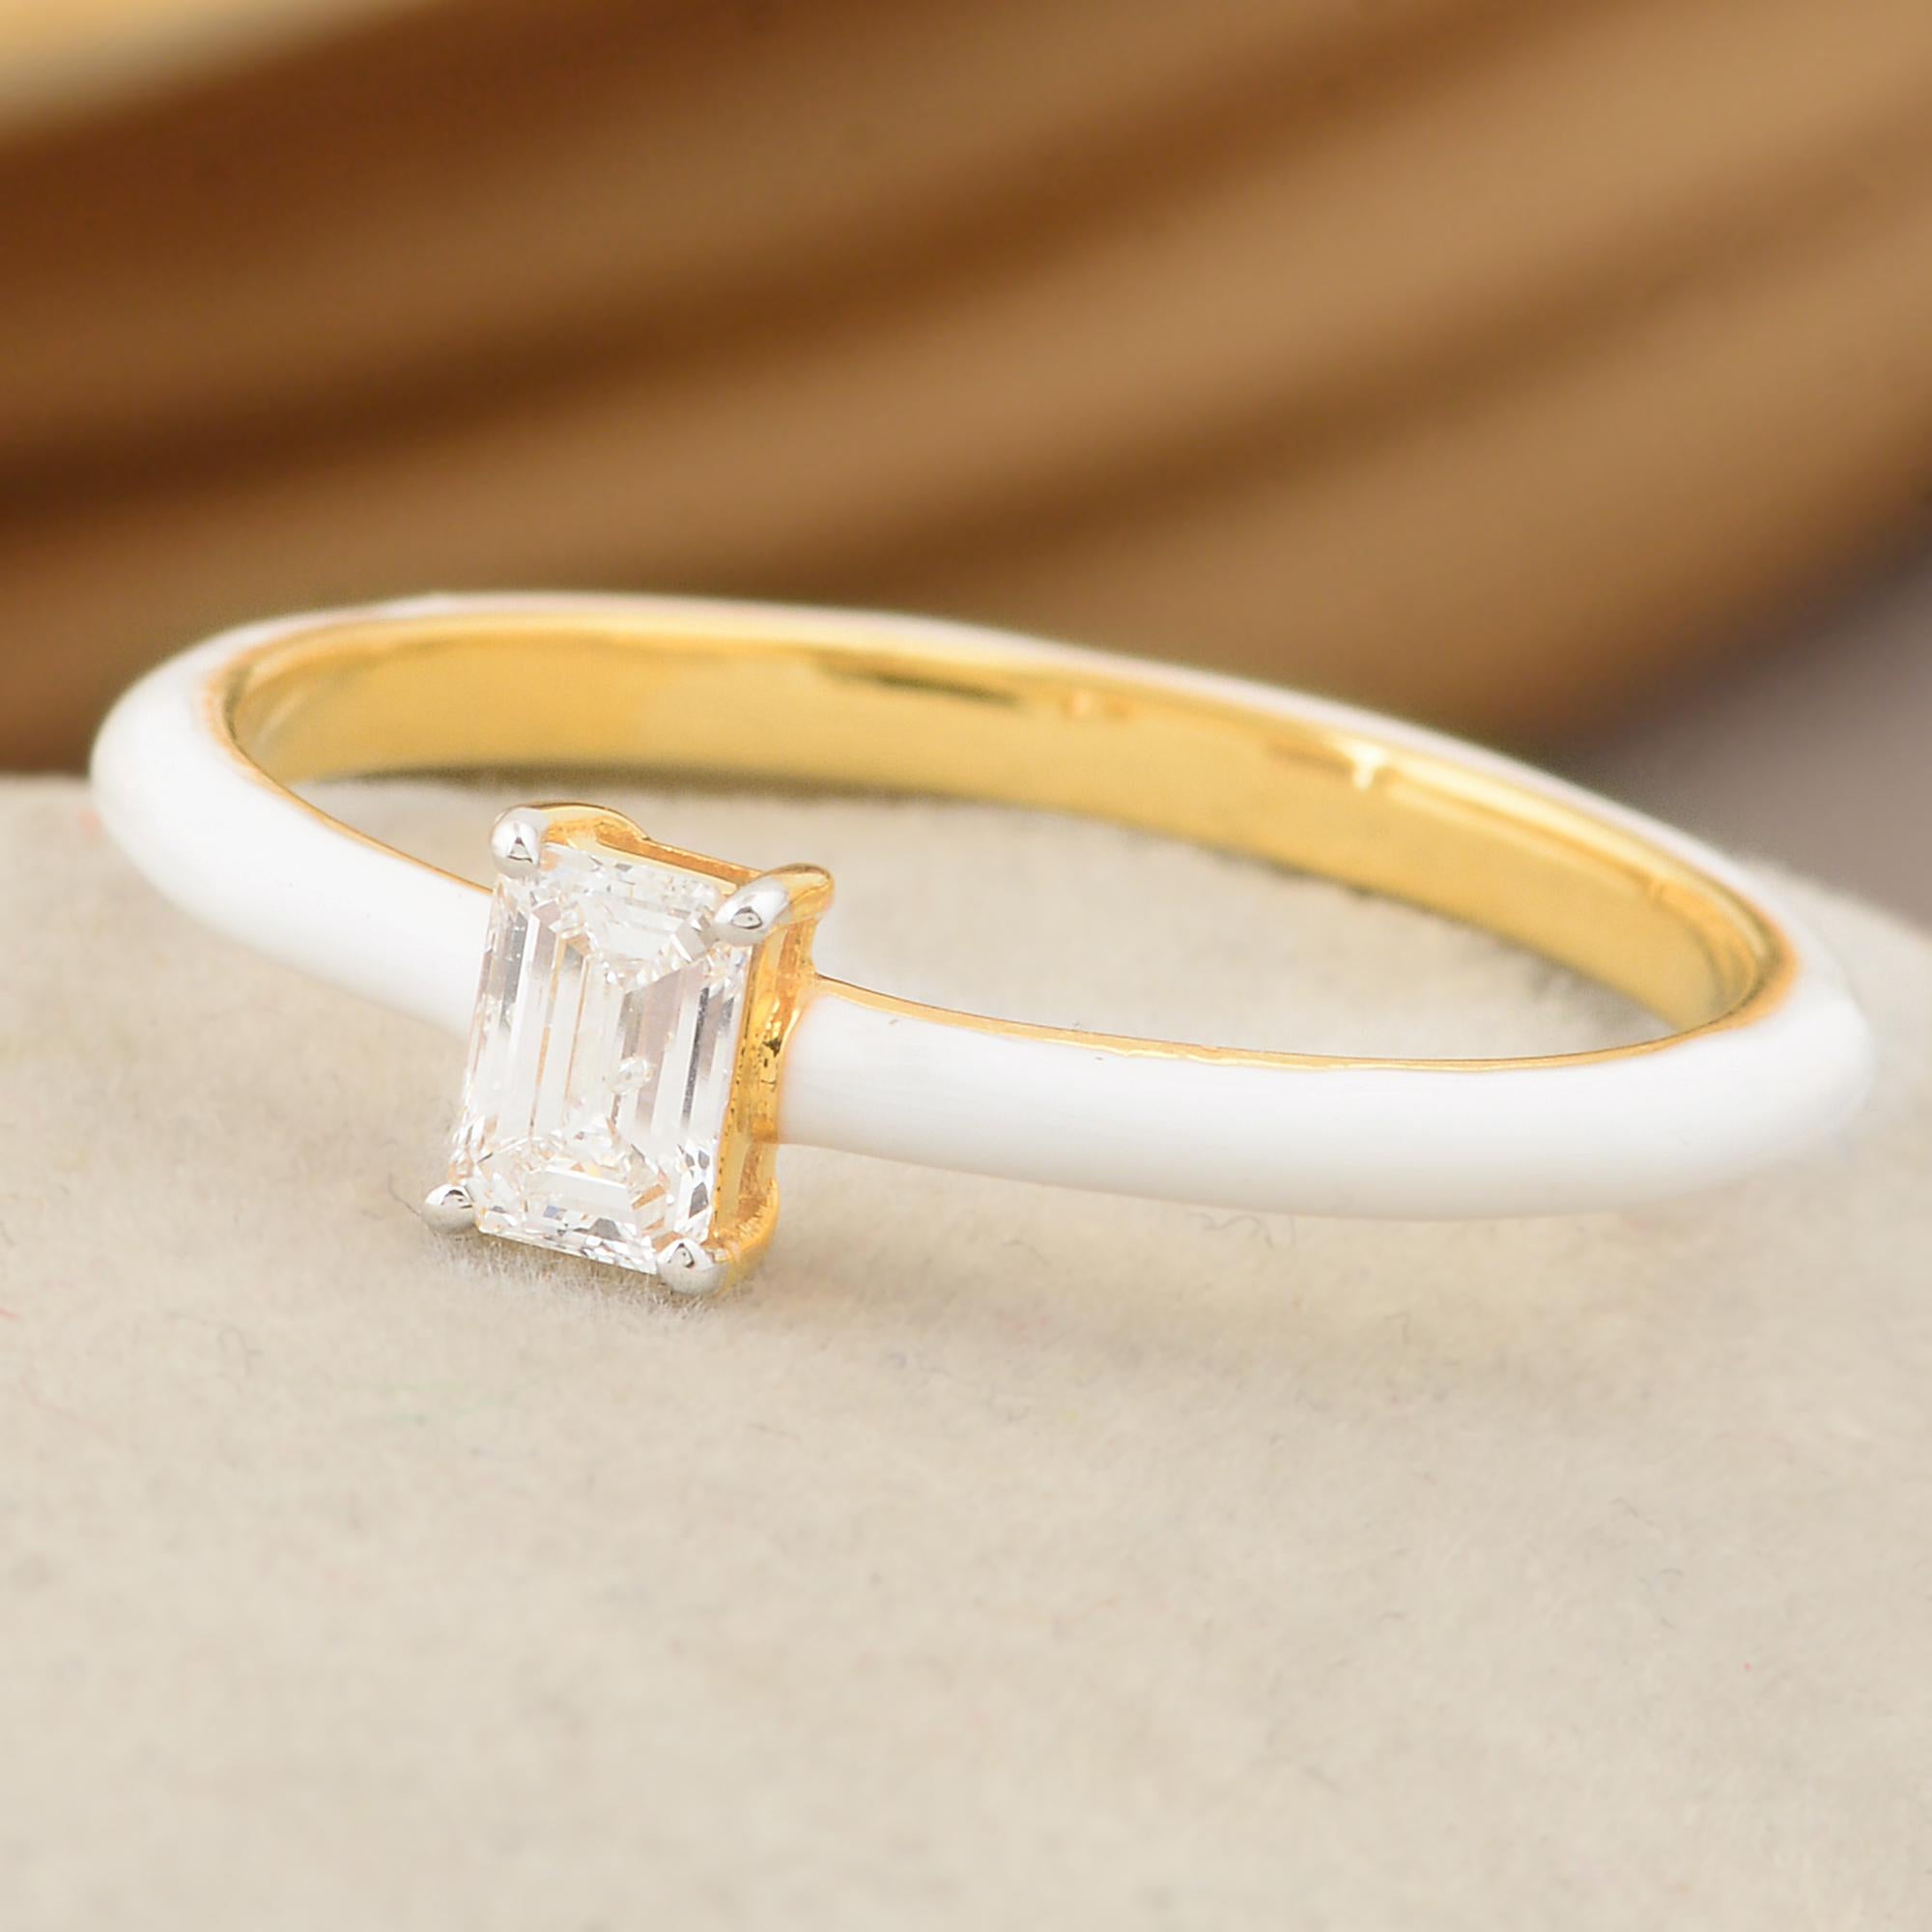 For Sale:  0.26 Carat Solitaire Emerald Cut Diamond Band Ring White Enamel 18k Yellow Gold 3